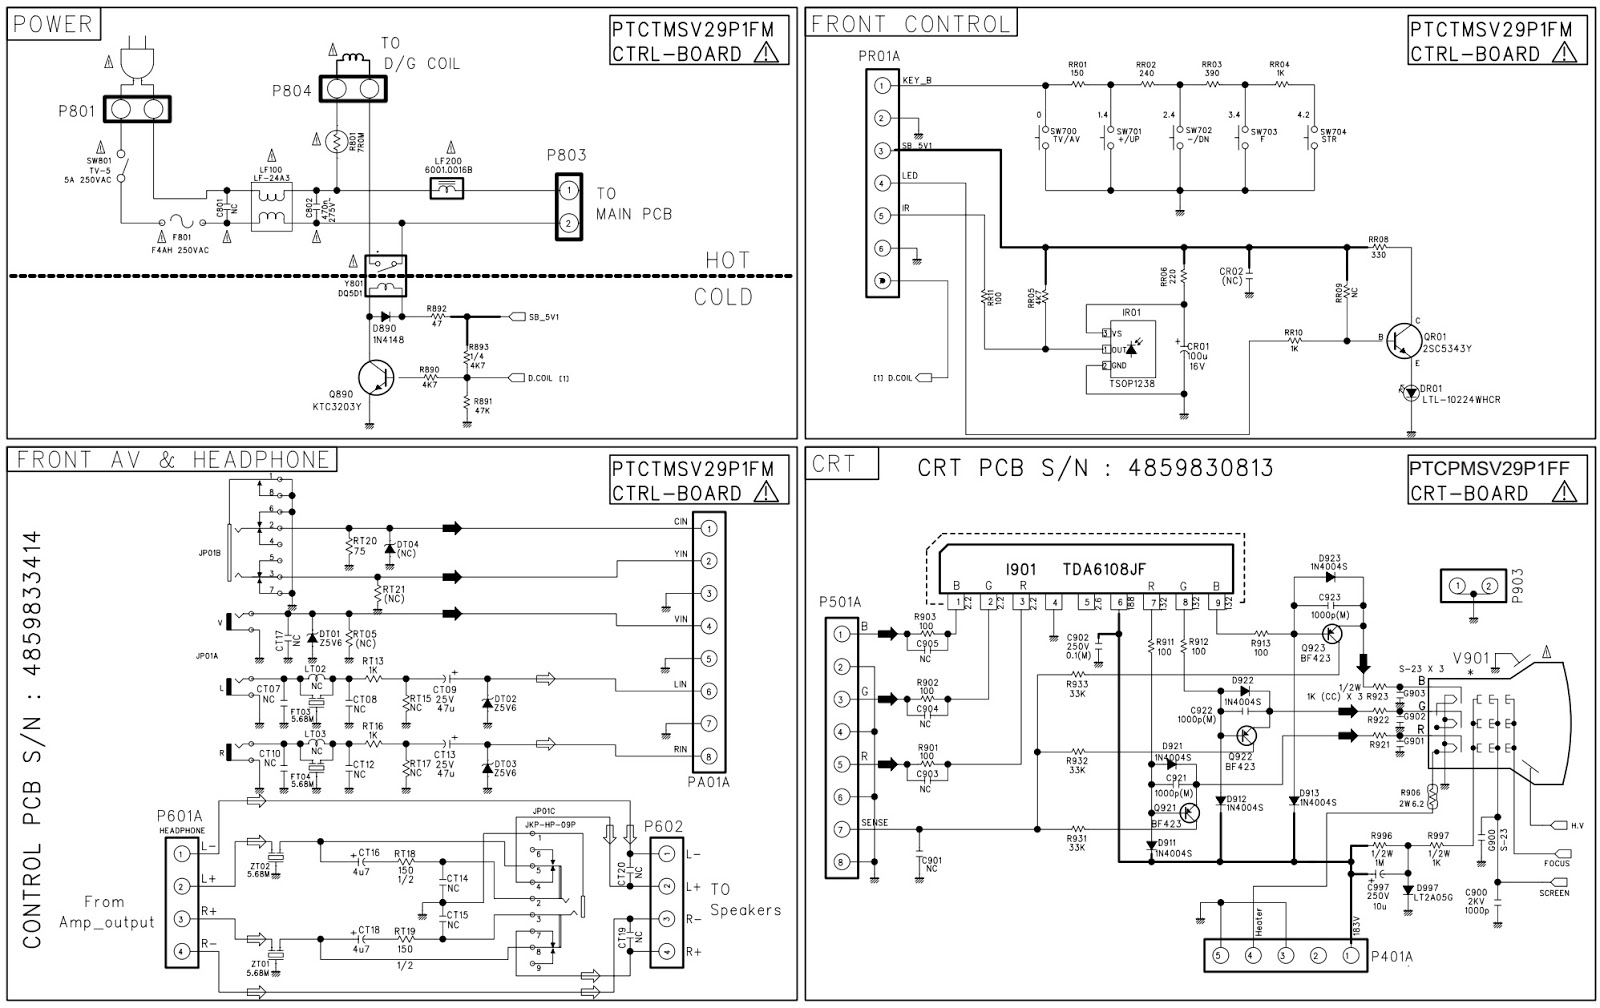 Schematic Diagrams: Panasonic TX29E50D 29inch CRT TV – How to enter the